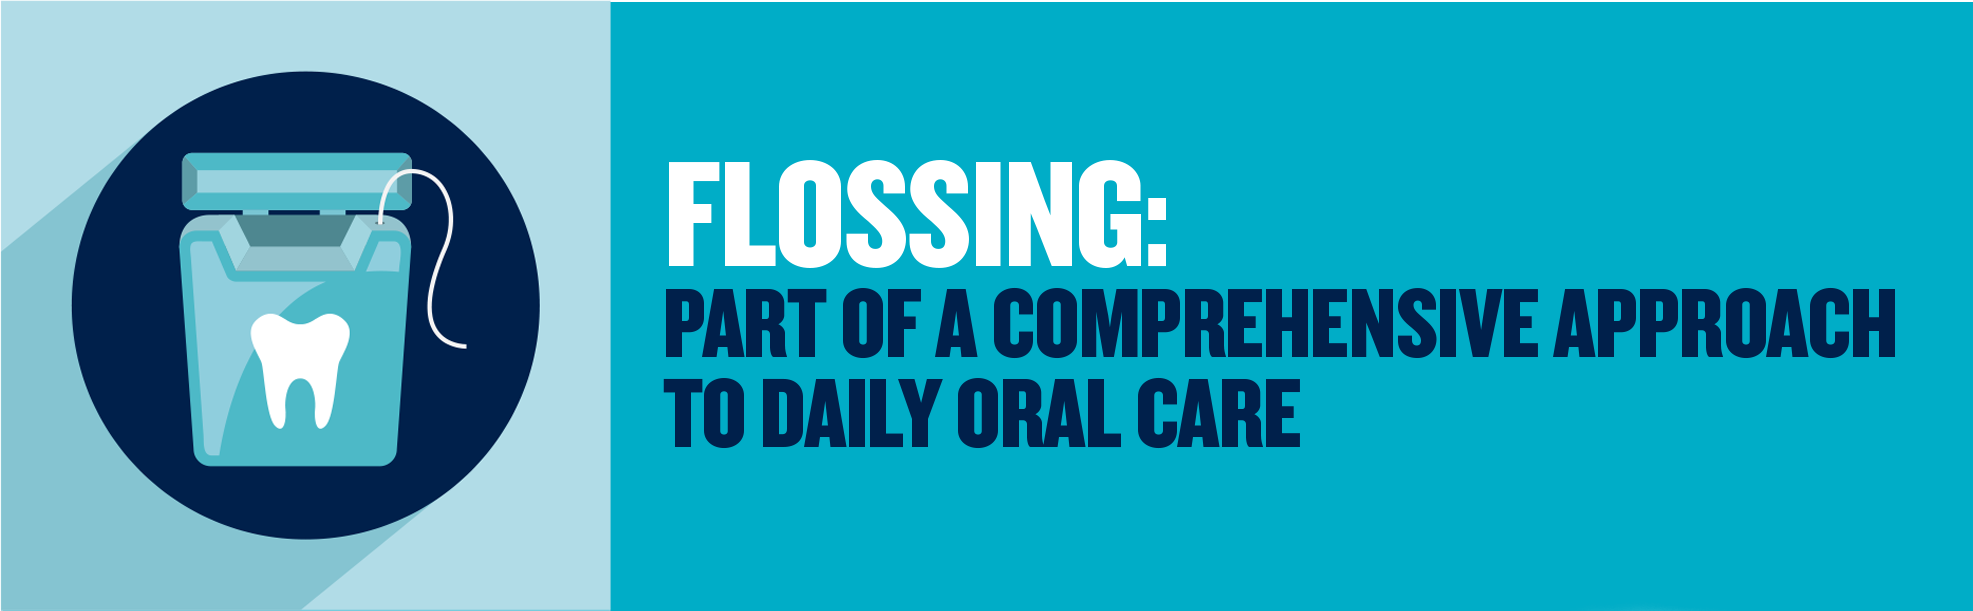 Flossing: Part of a comprehensive approach to daily oral care - LISTERINE® PROFESSIONAL